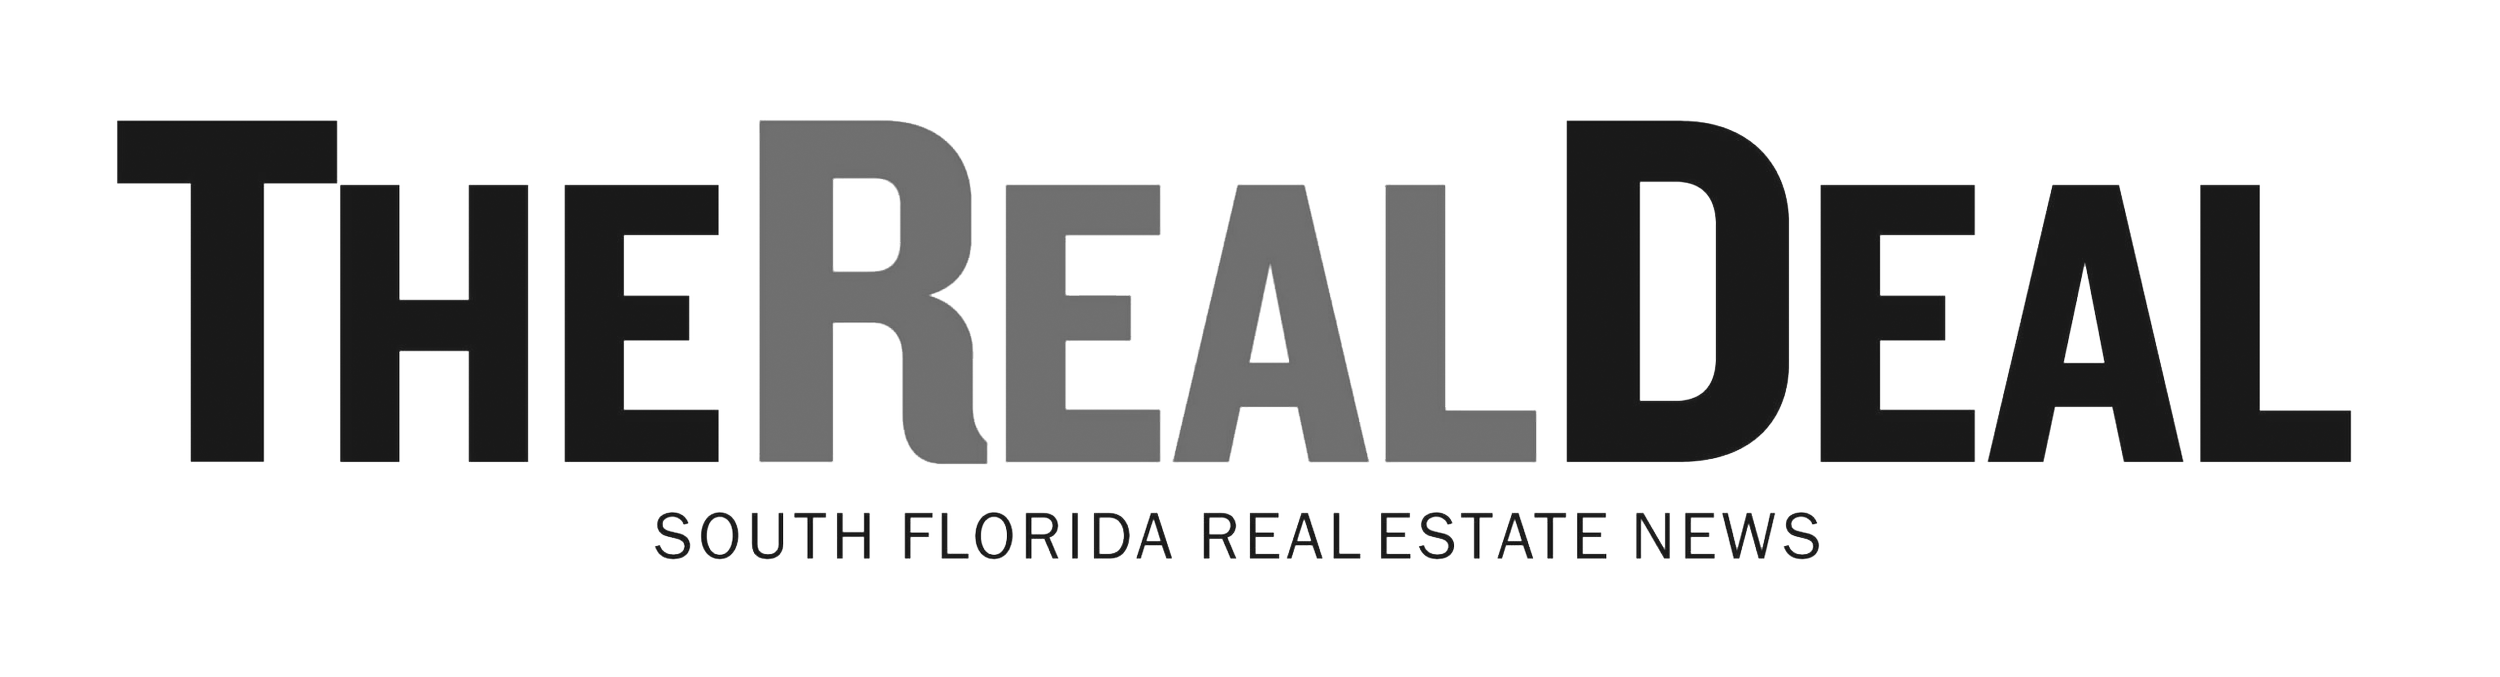 The-Real-Deal-South-Florida-logo-scaled.png